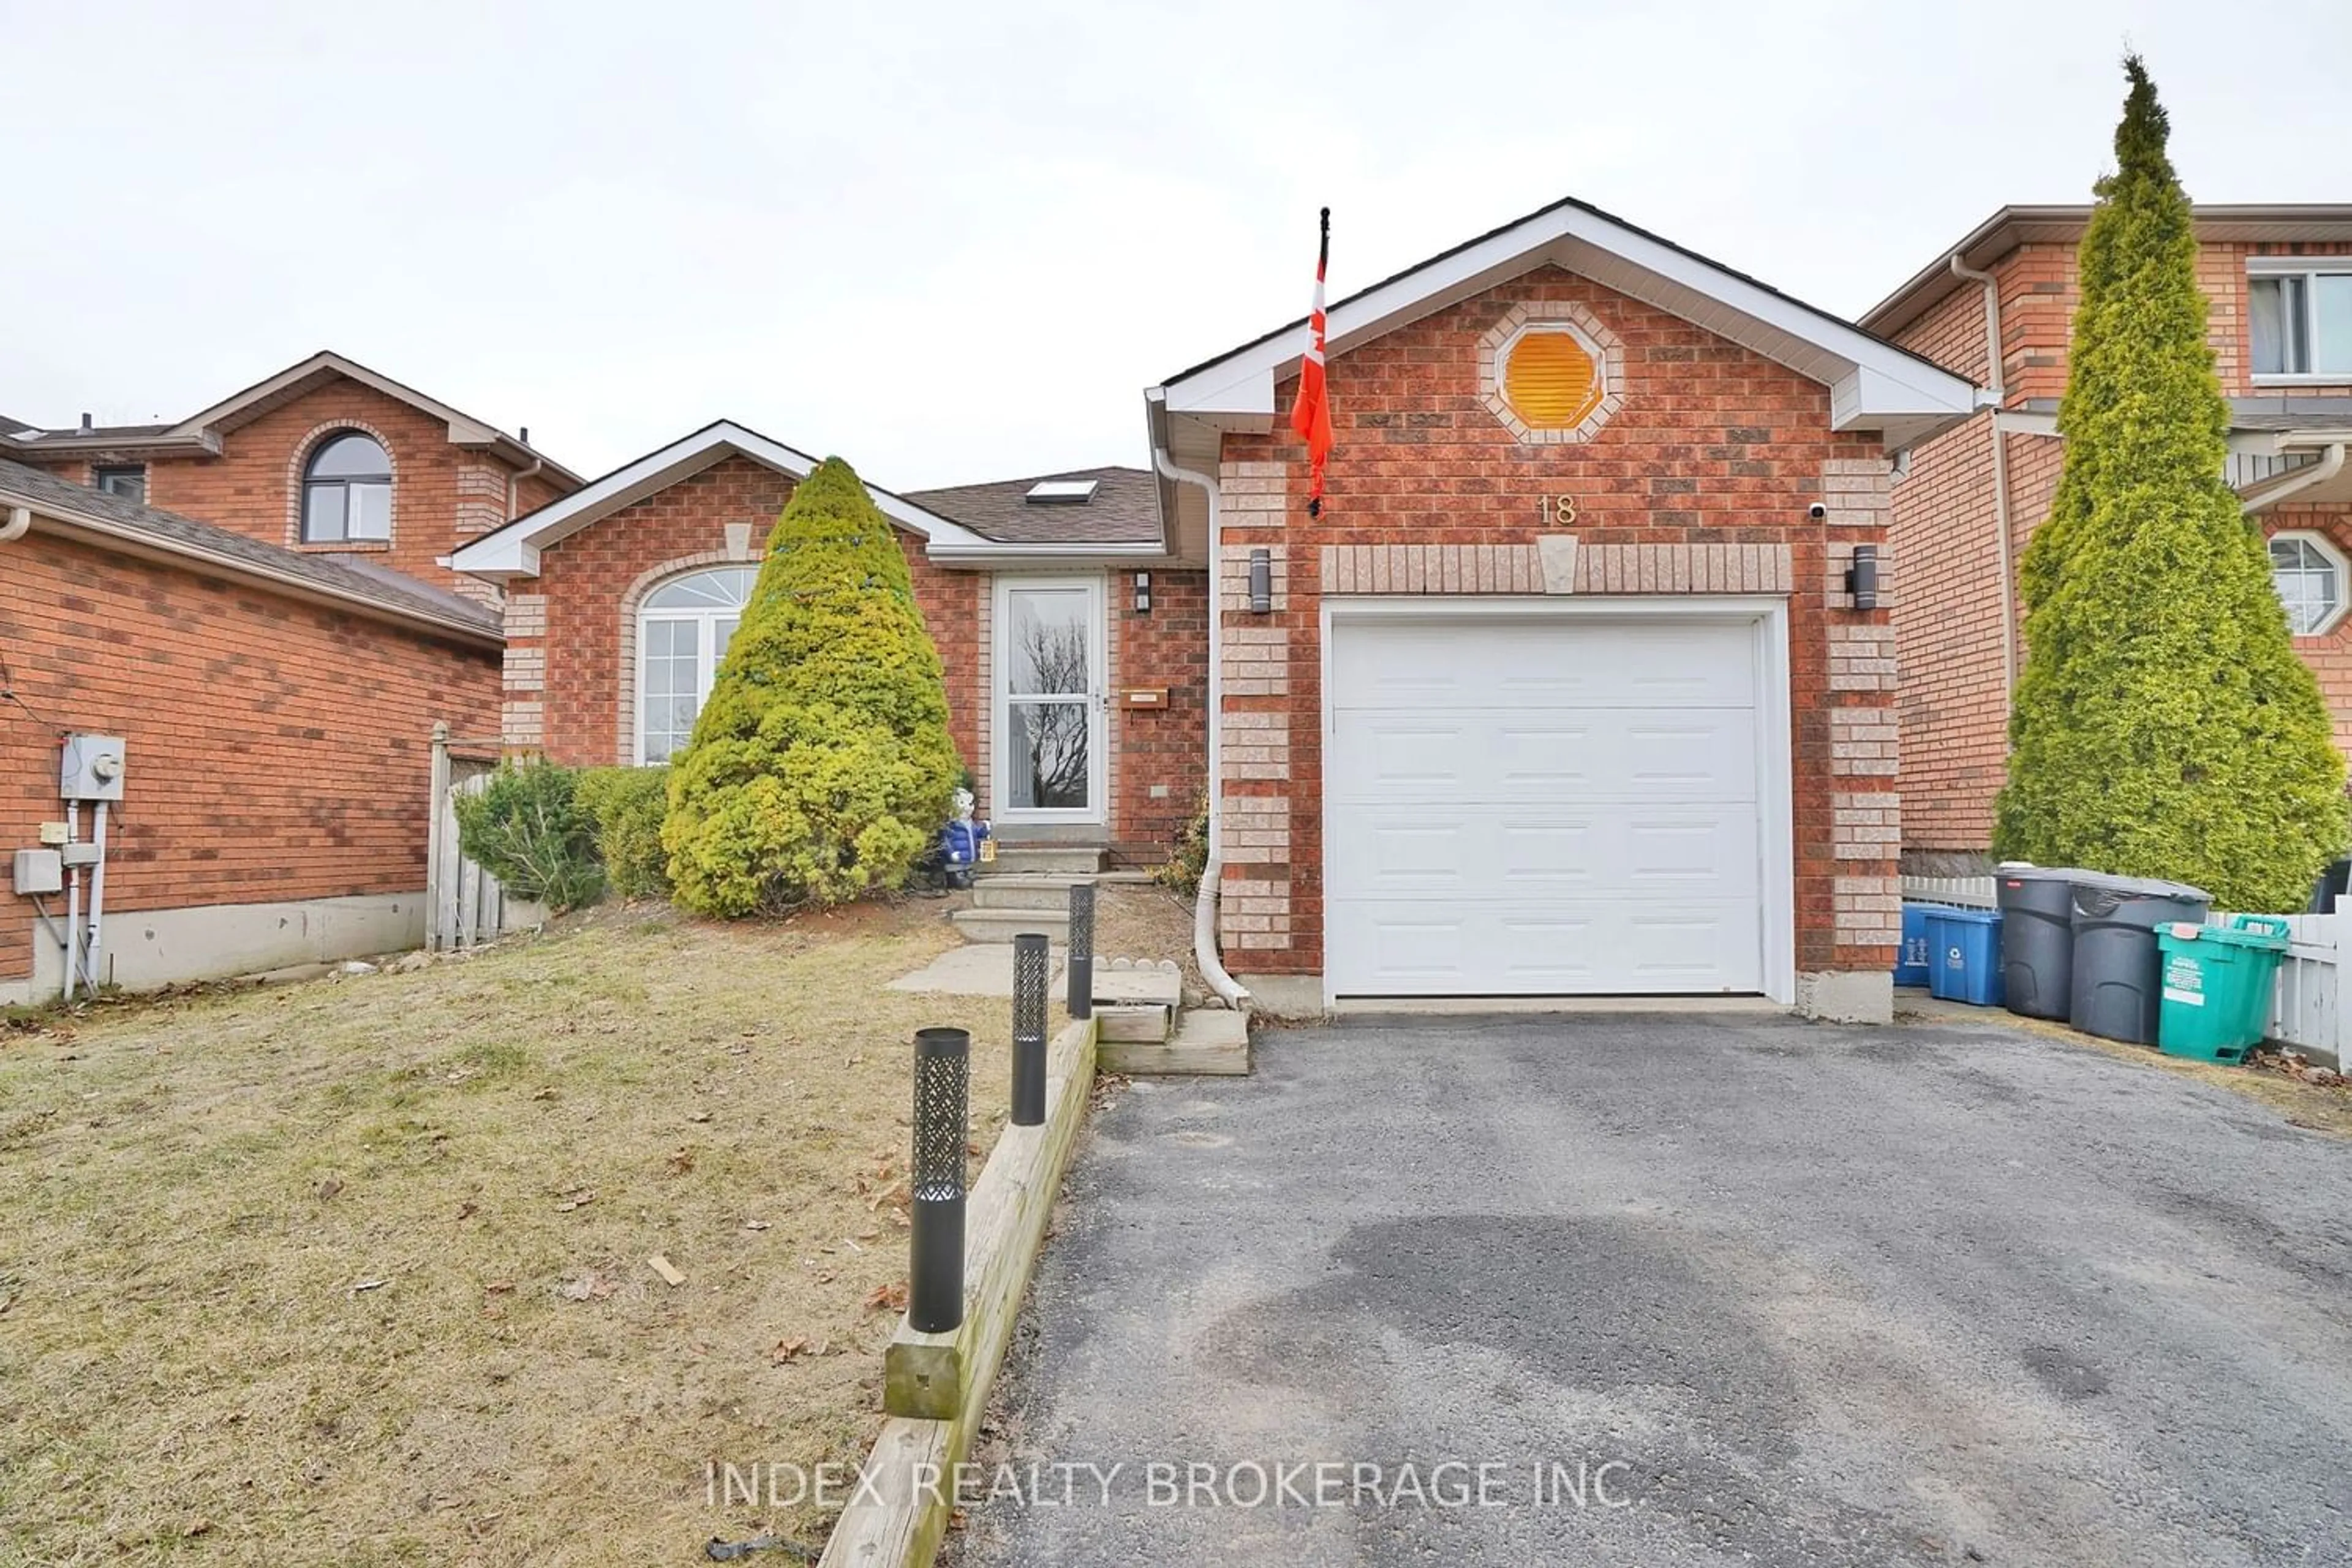 Frontside or backside of a home for 18 Girdwood Dr, Barrie Ontario L4N 8R2